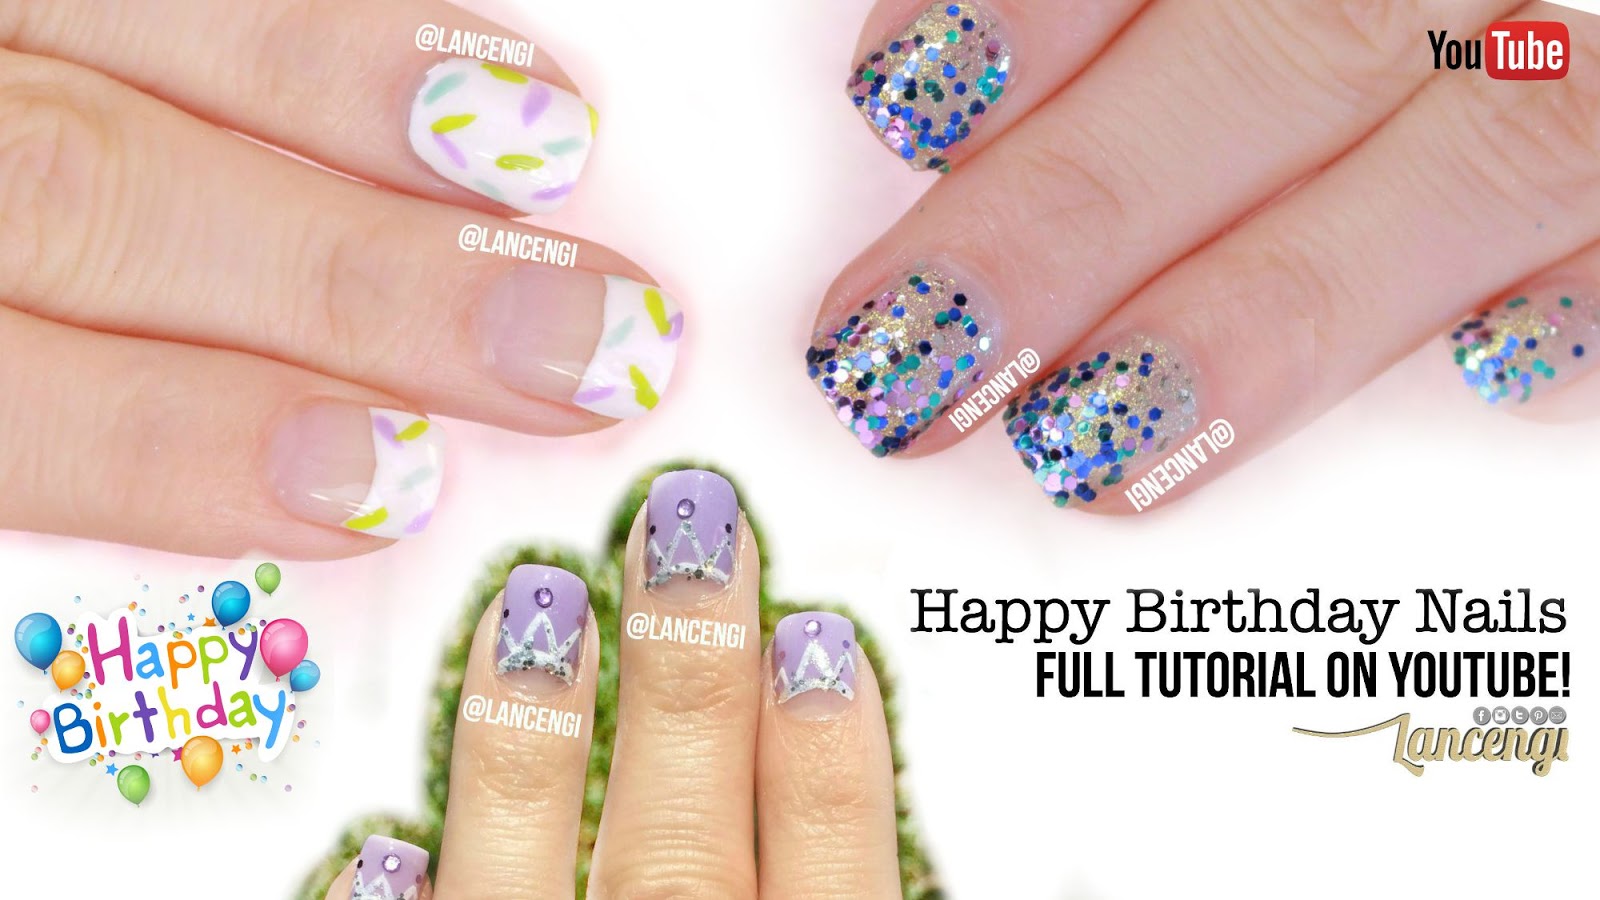 2. Birthday Nail Designs for Square Nails - wide 8